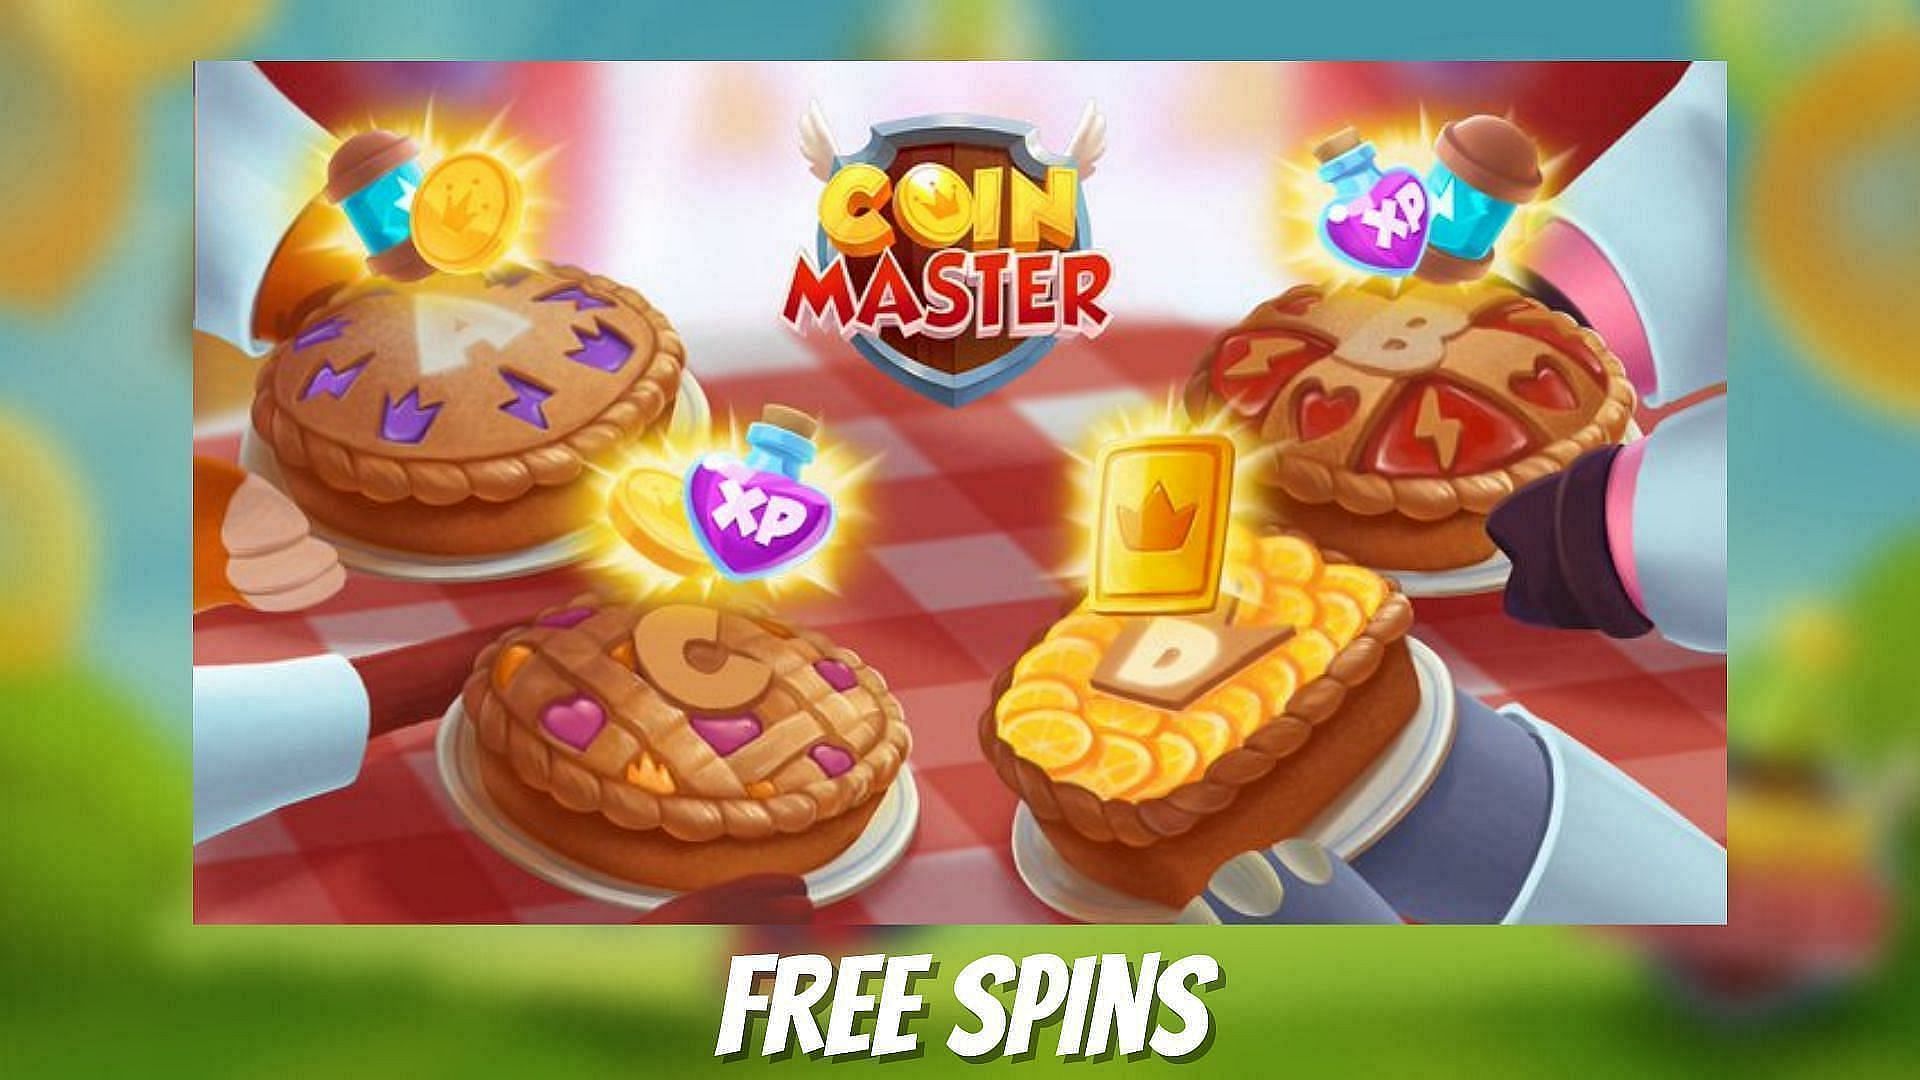 800 free spins coin master